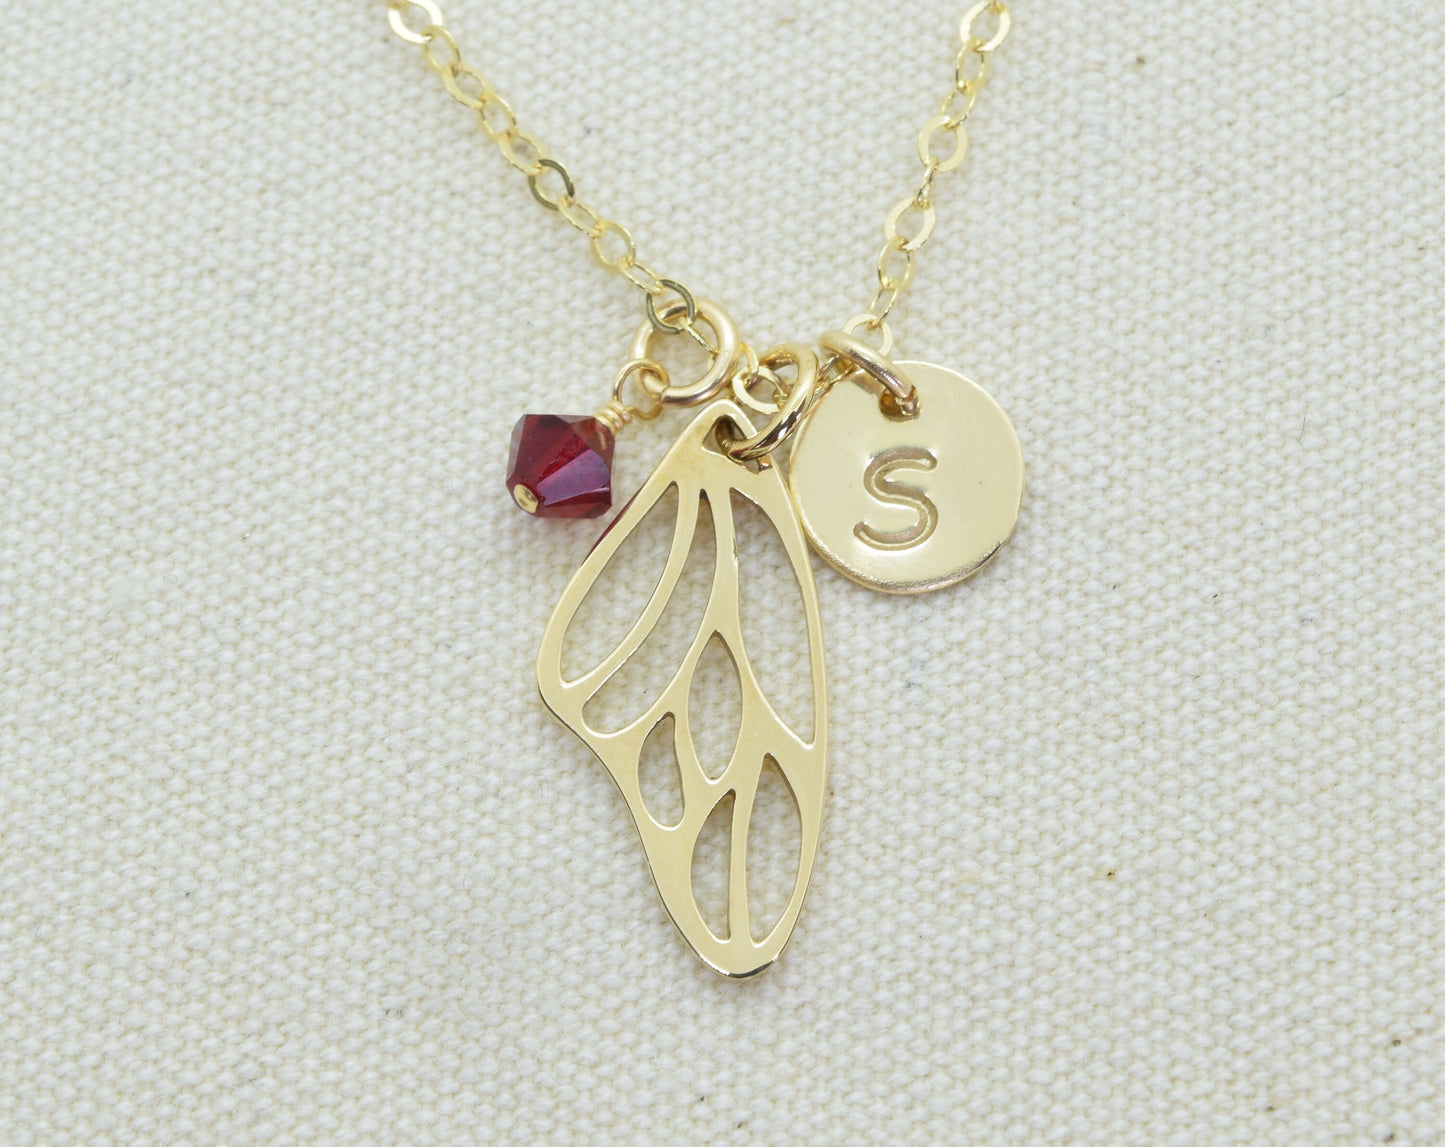 Gold Butterfly Wing Charm Necklace, Butterfly Wing Pendant, Nature Lover Gift, Botanical Jewelry, Optional Initial and Birthstone